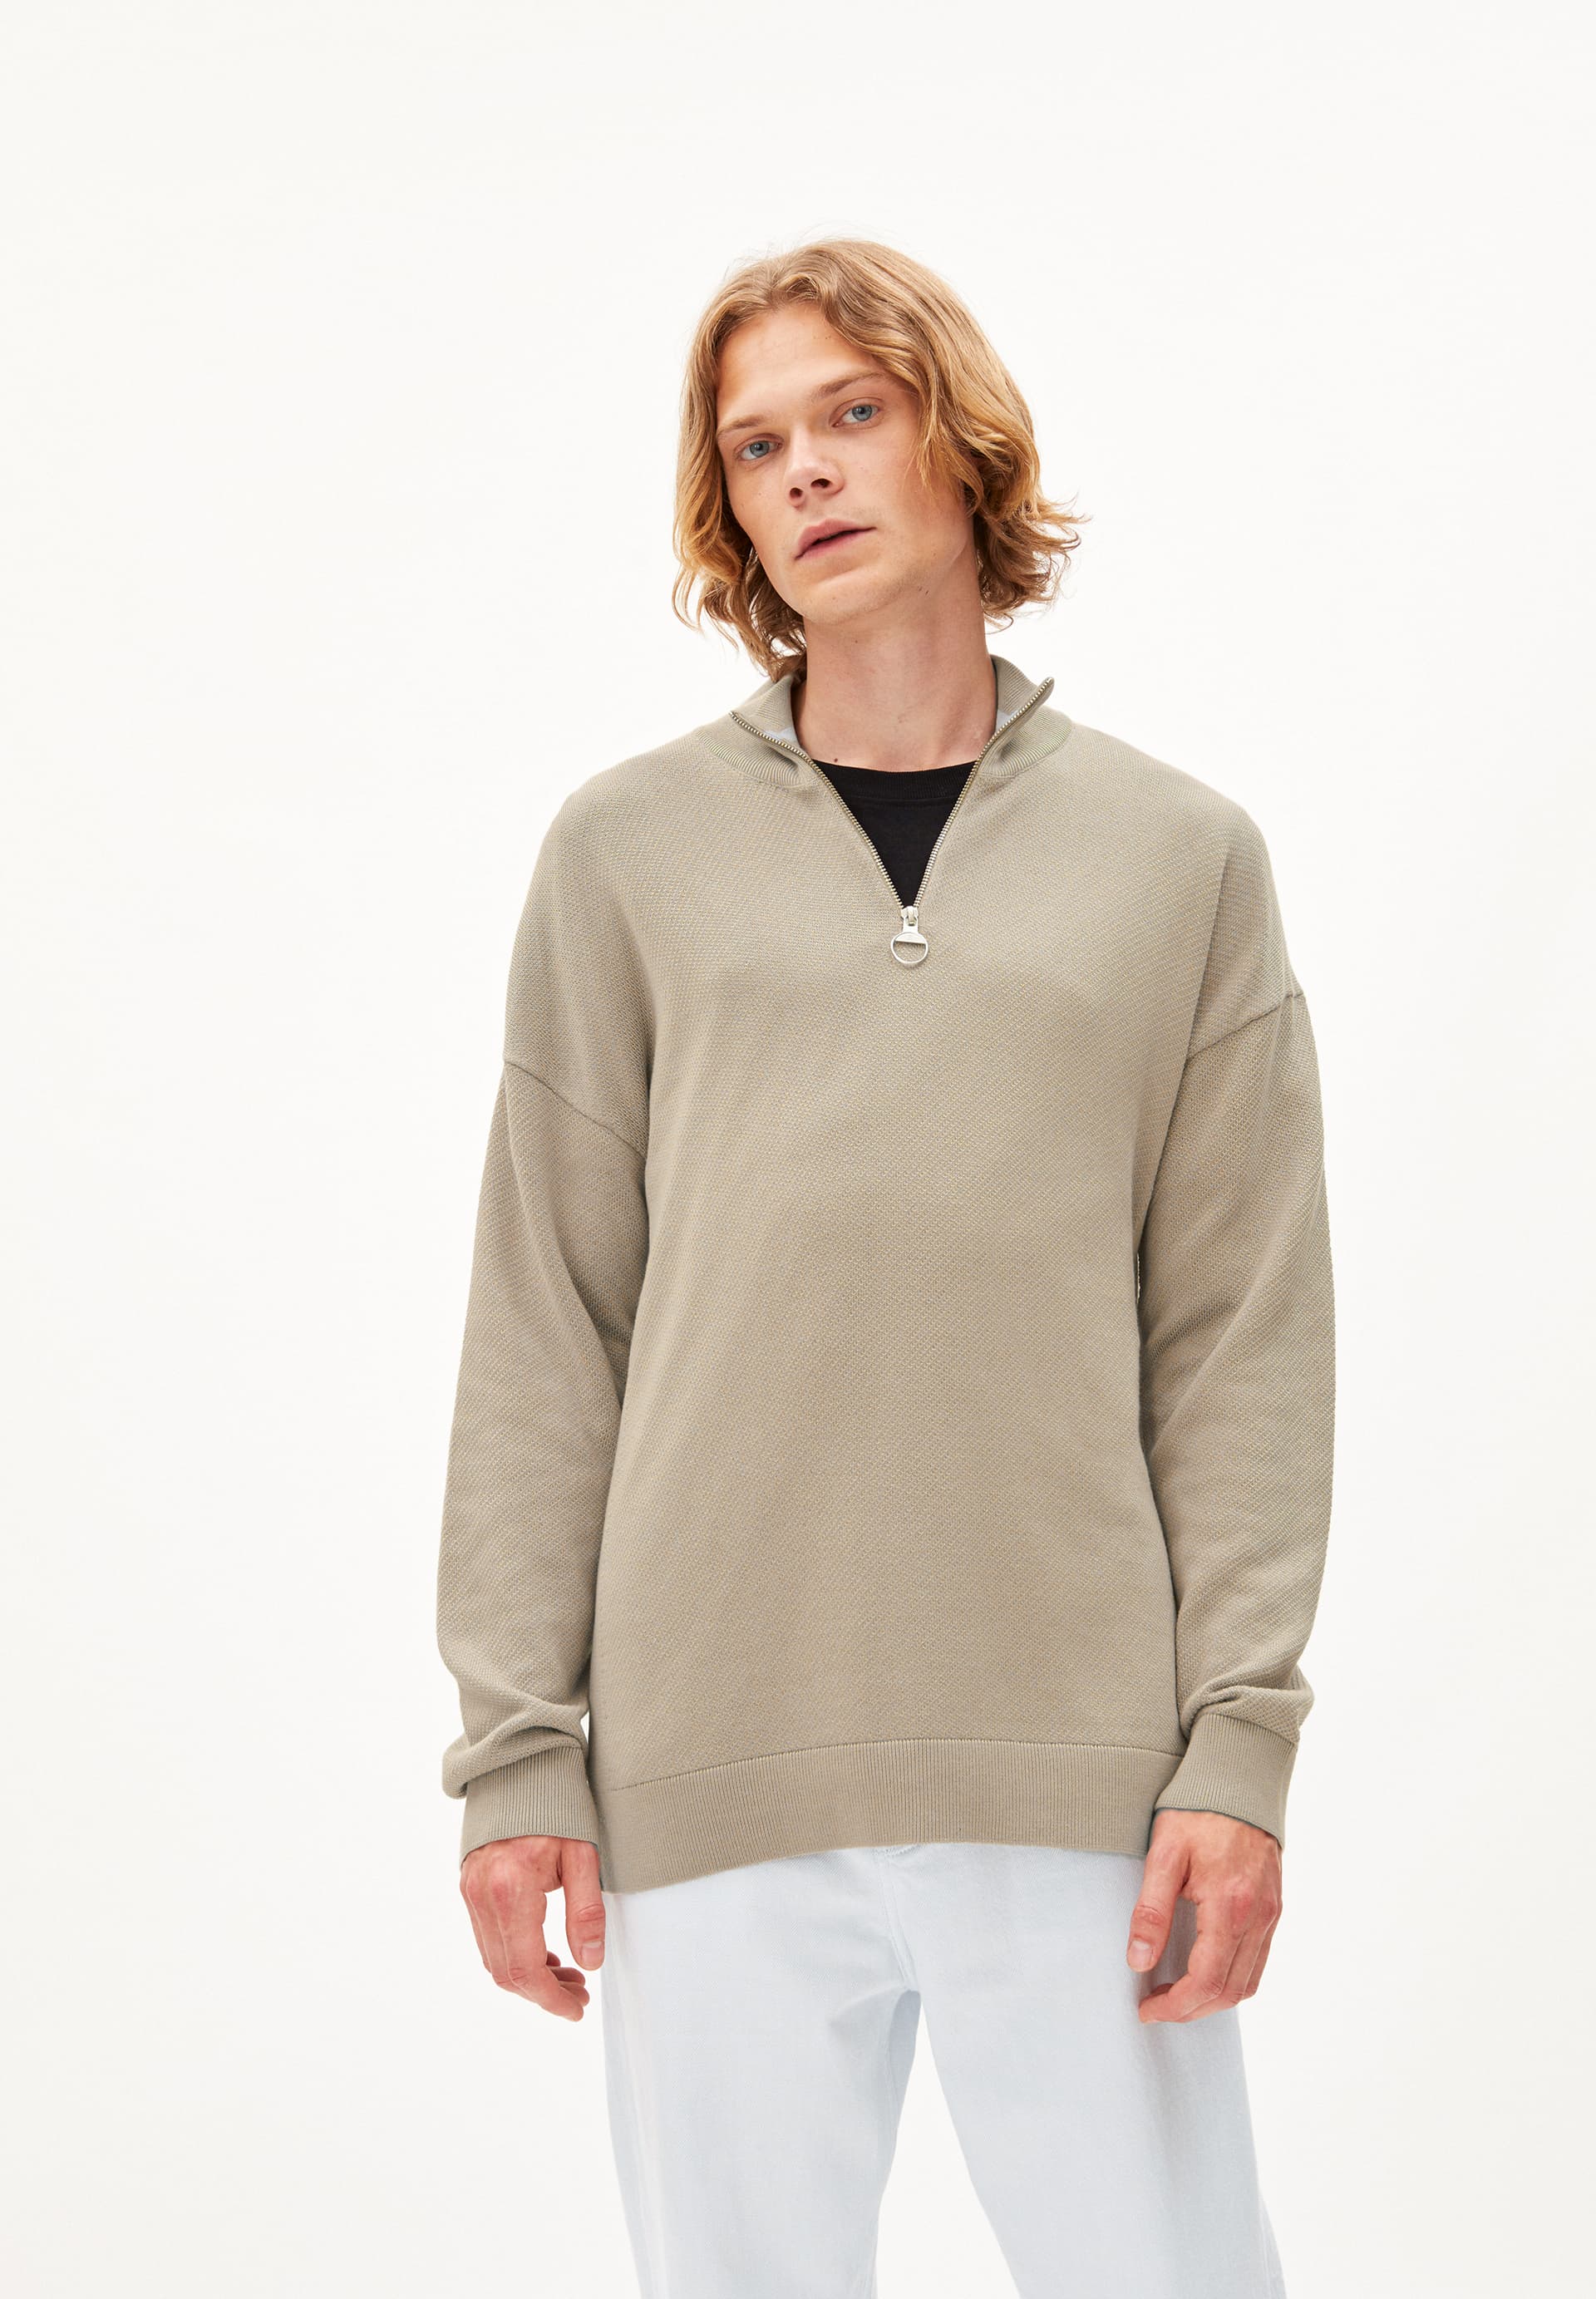 LEDAAN Pullover Relaxed Fit aus TENCEL™ Lyocell Mix